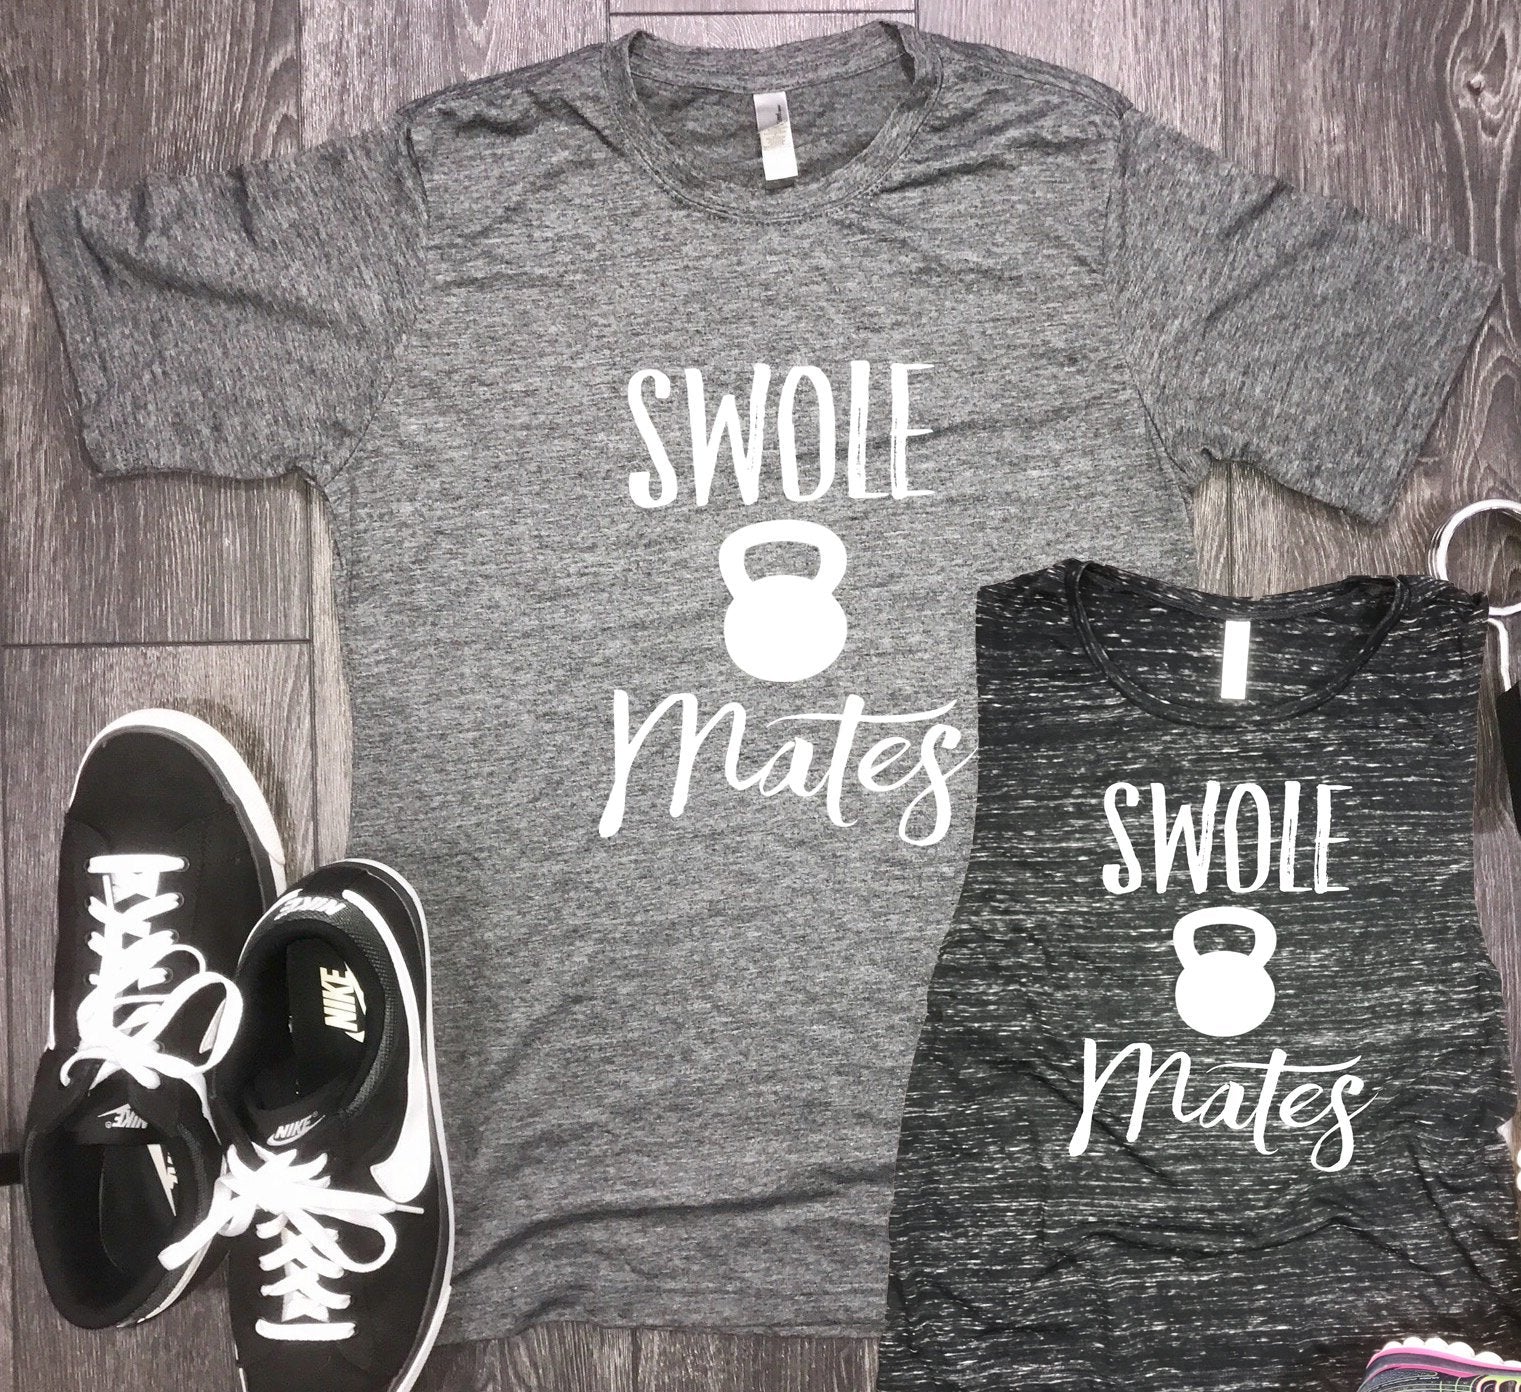 couples shirts, couples workout shirts, funny couples shirts